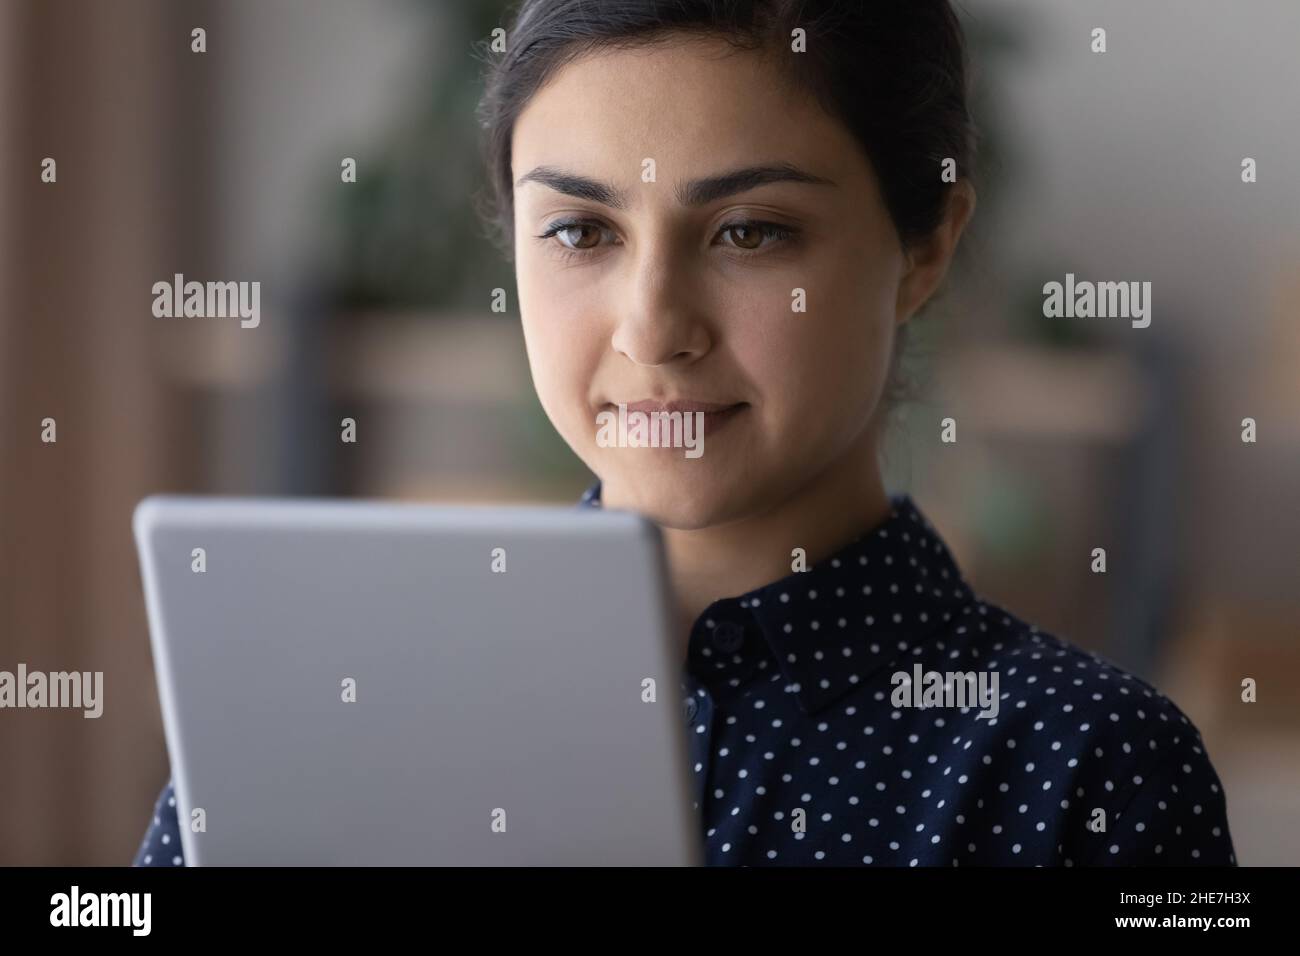 Focused millennial young woman using tablet computer Stock Photo